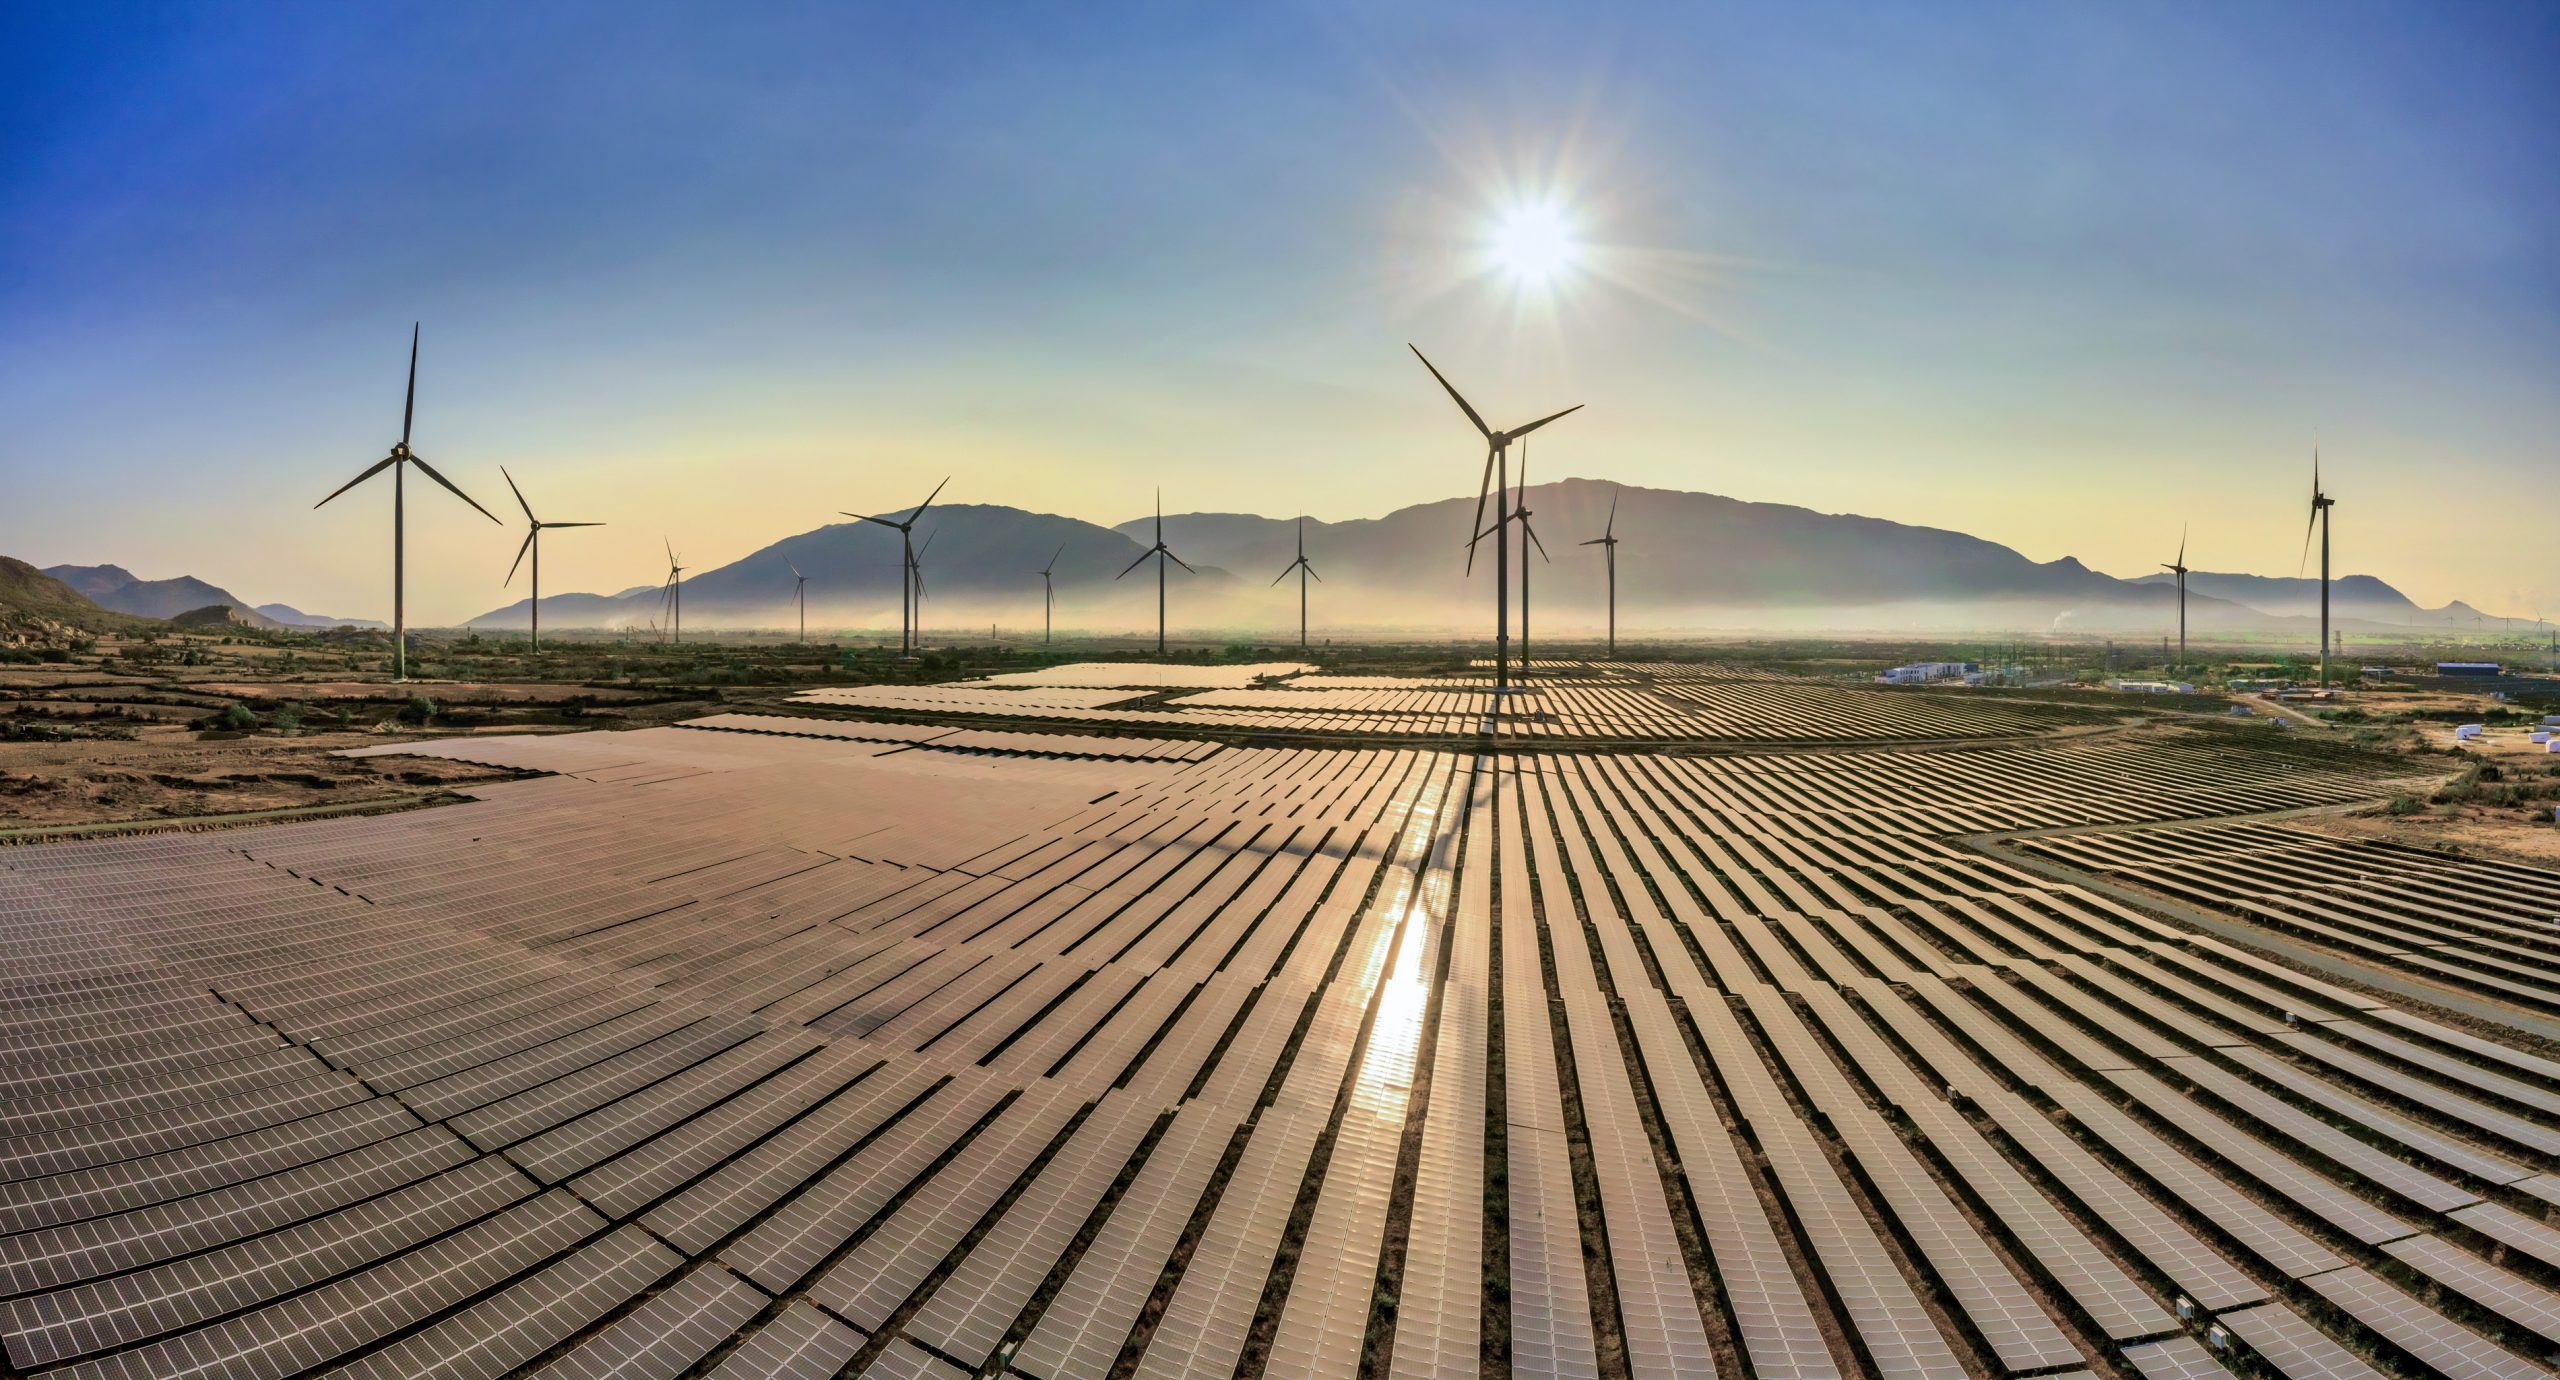 Amp Energy India Emerges The Lowest Bidder In CESC’s 150 MW Wind-Solar Hybrid Auction – EQ Mag